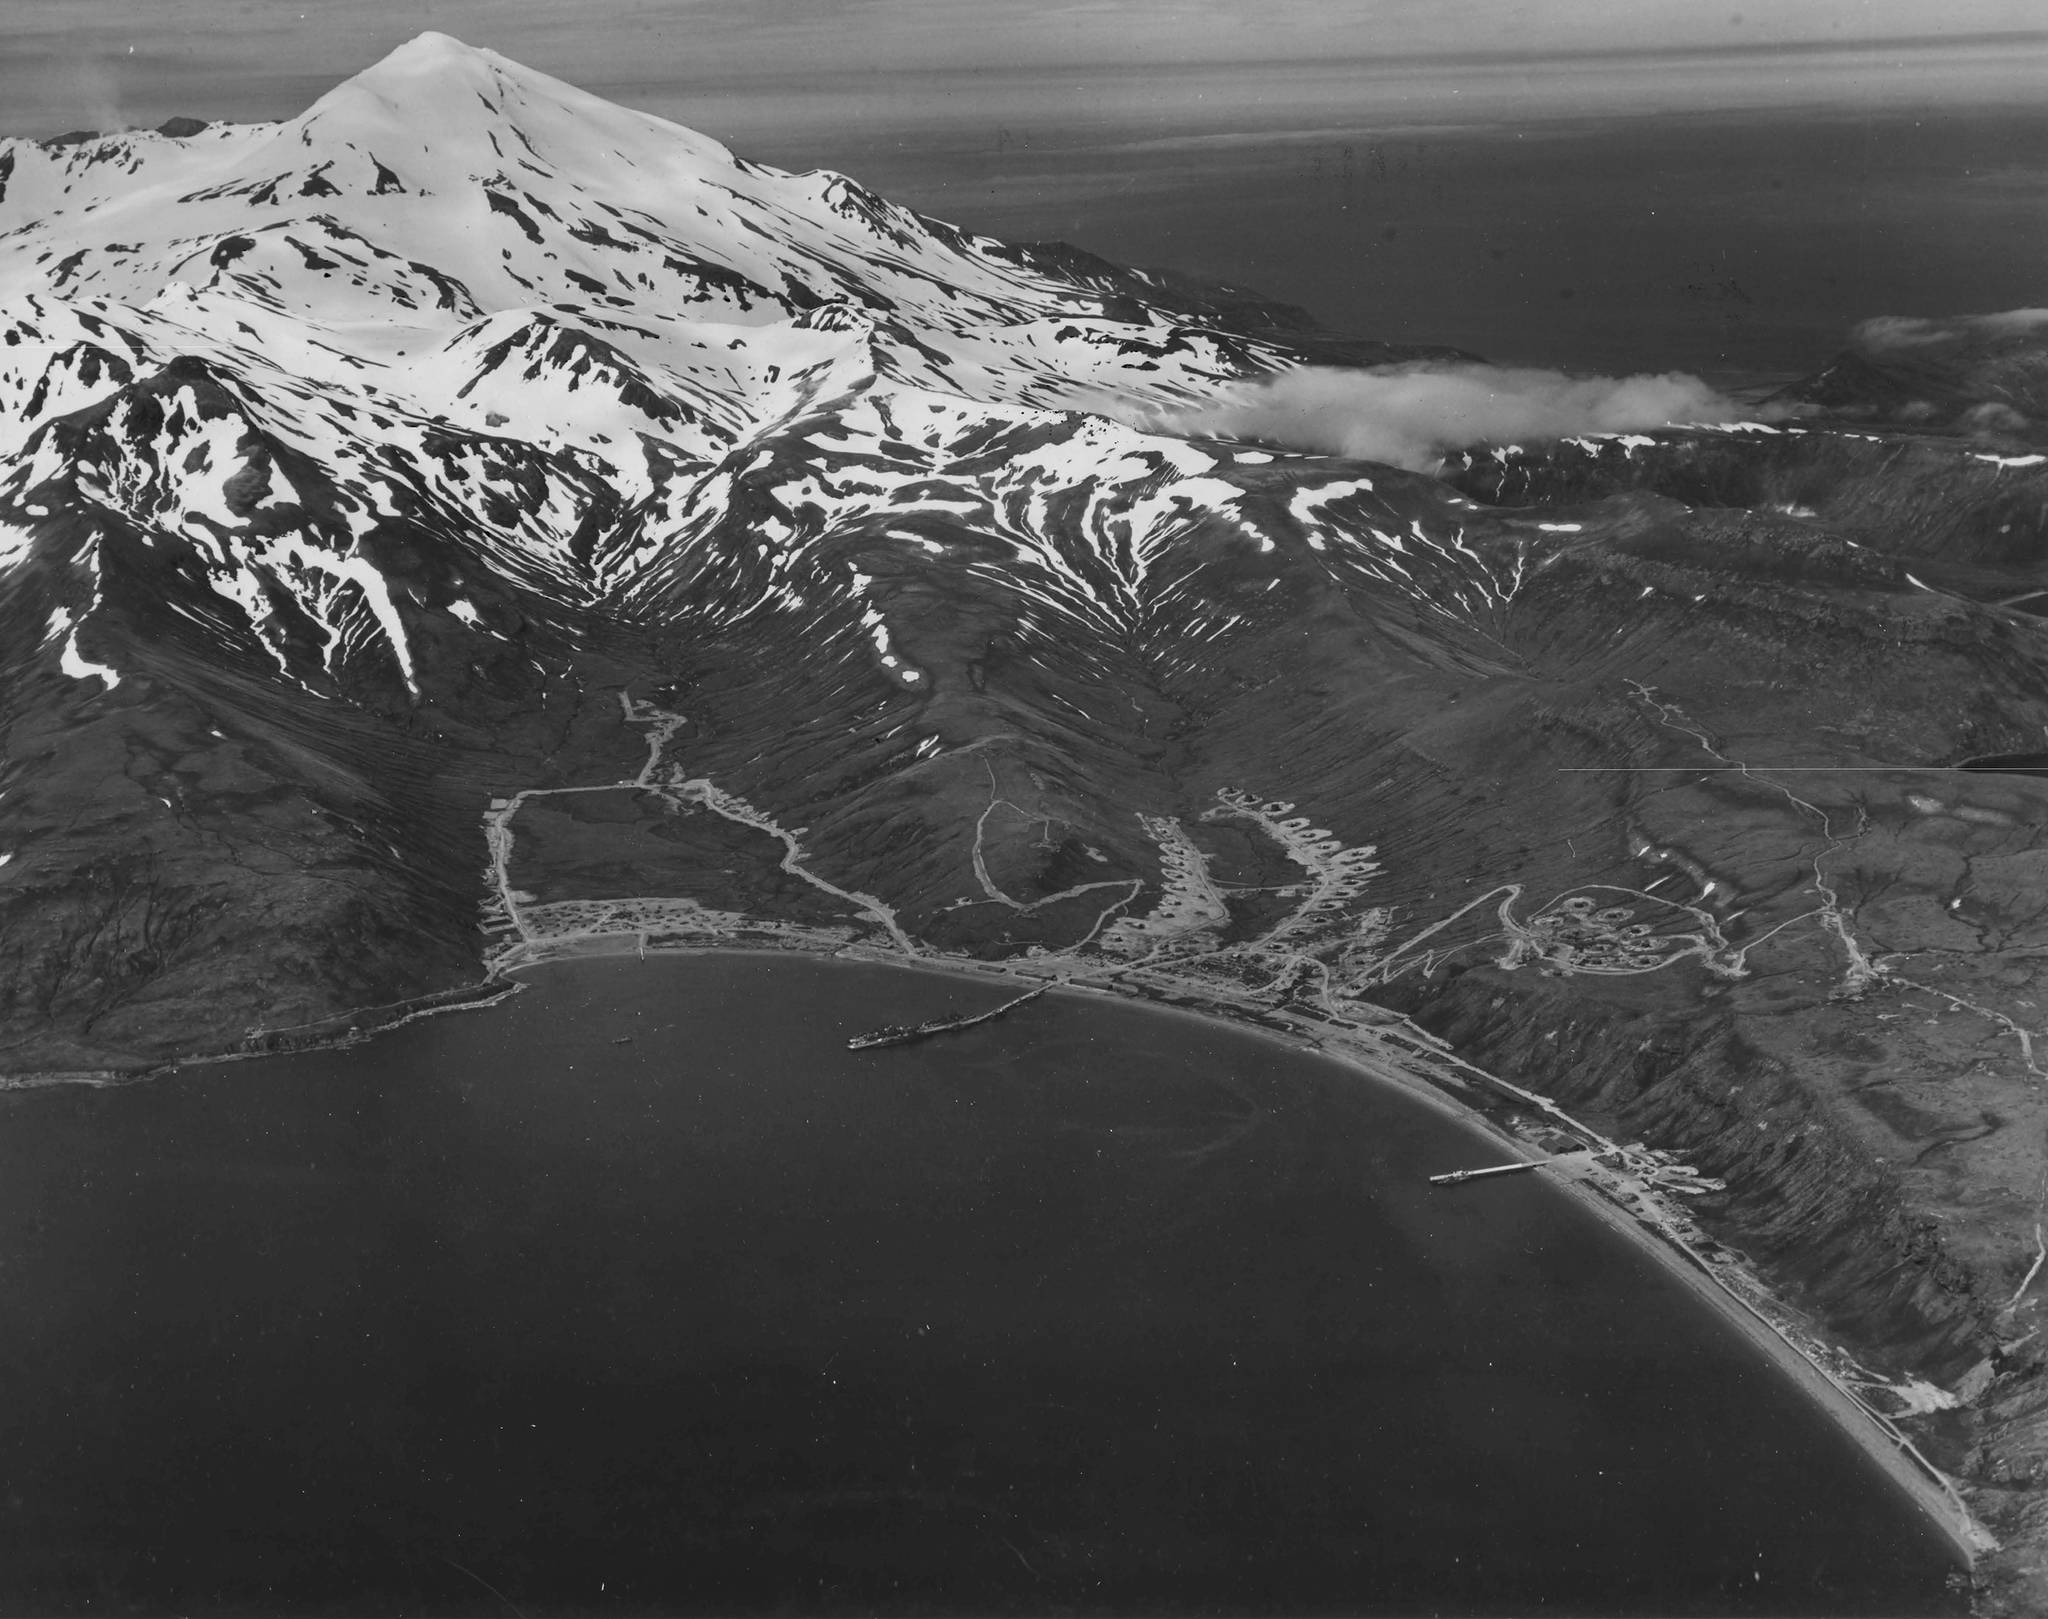 Sand Bay Naval Station on Great Sitkin Island was a hub for Navy vessels and aircraft during World War II. (U.S. Army Corps of Engineers)